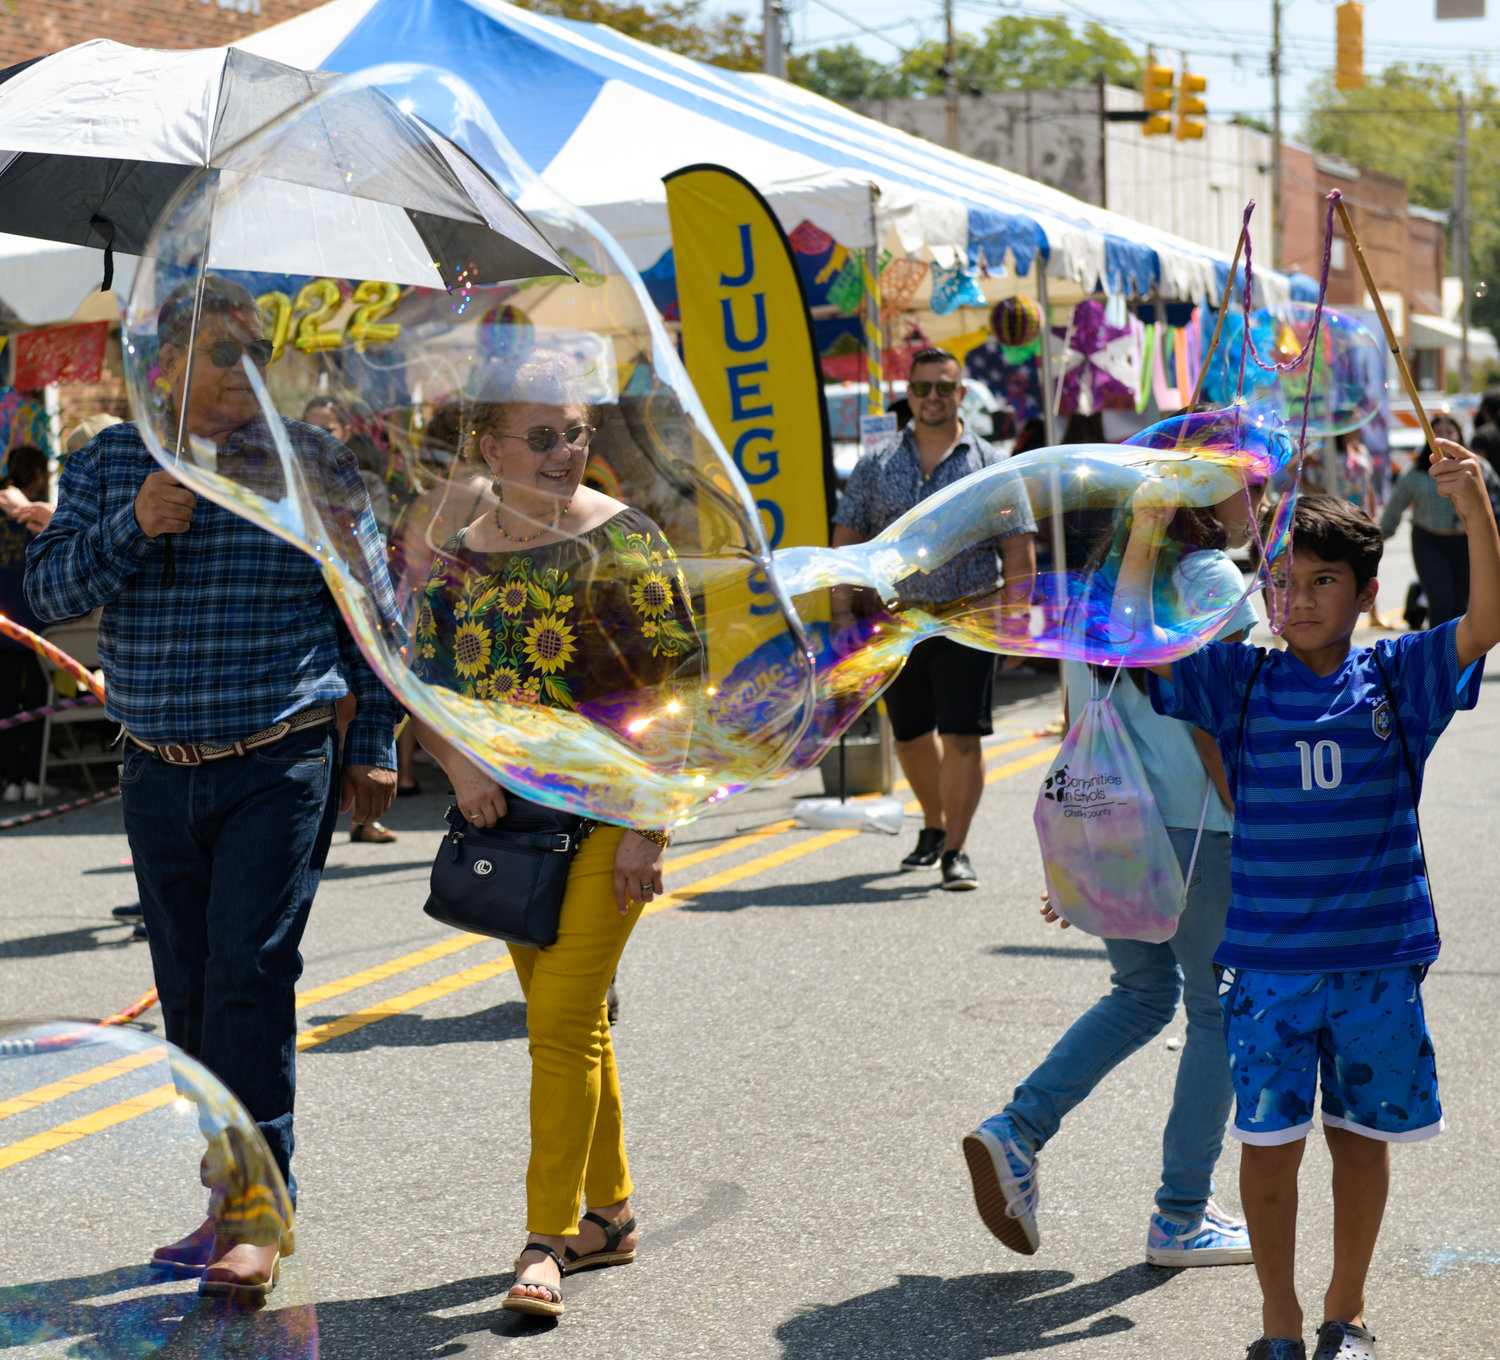 Kids play at the bubble station at Saturday's Hispanic Heritage Festival.